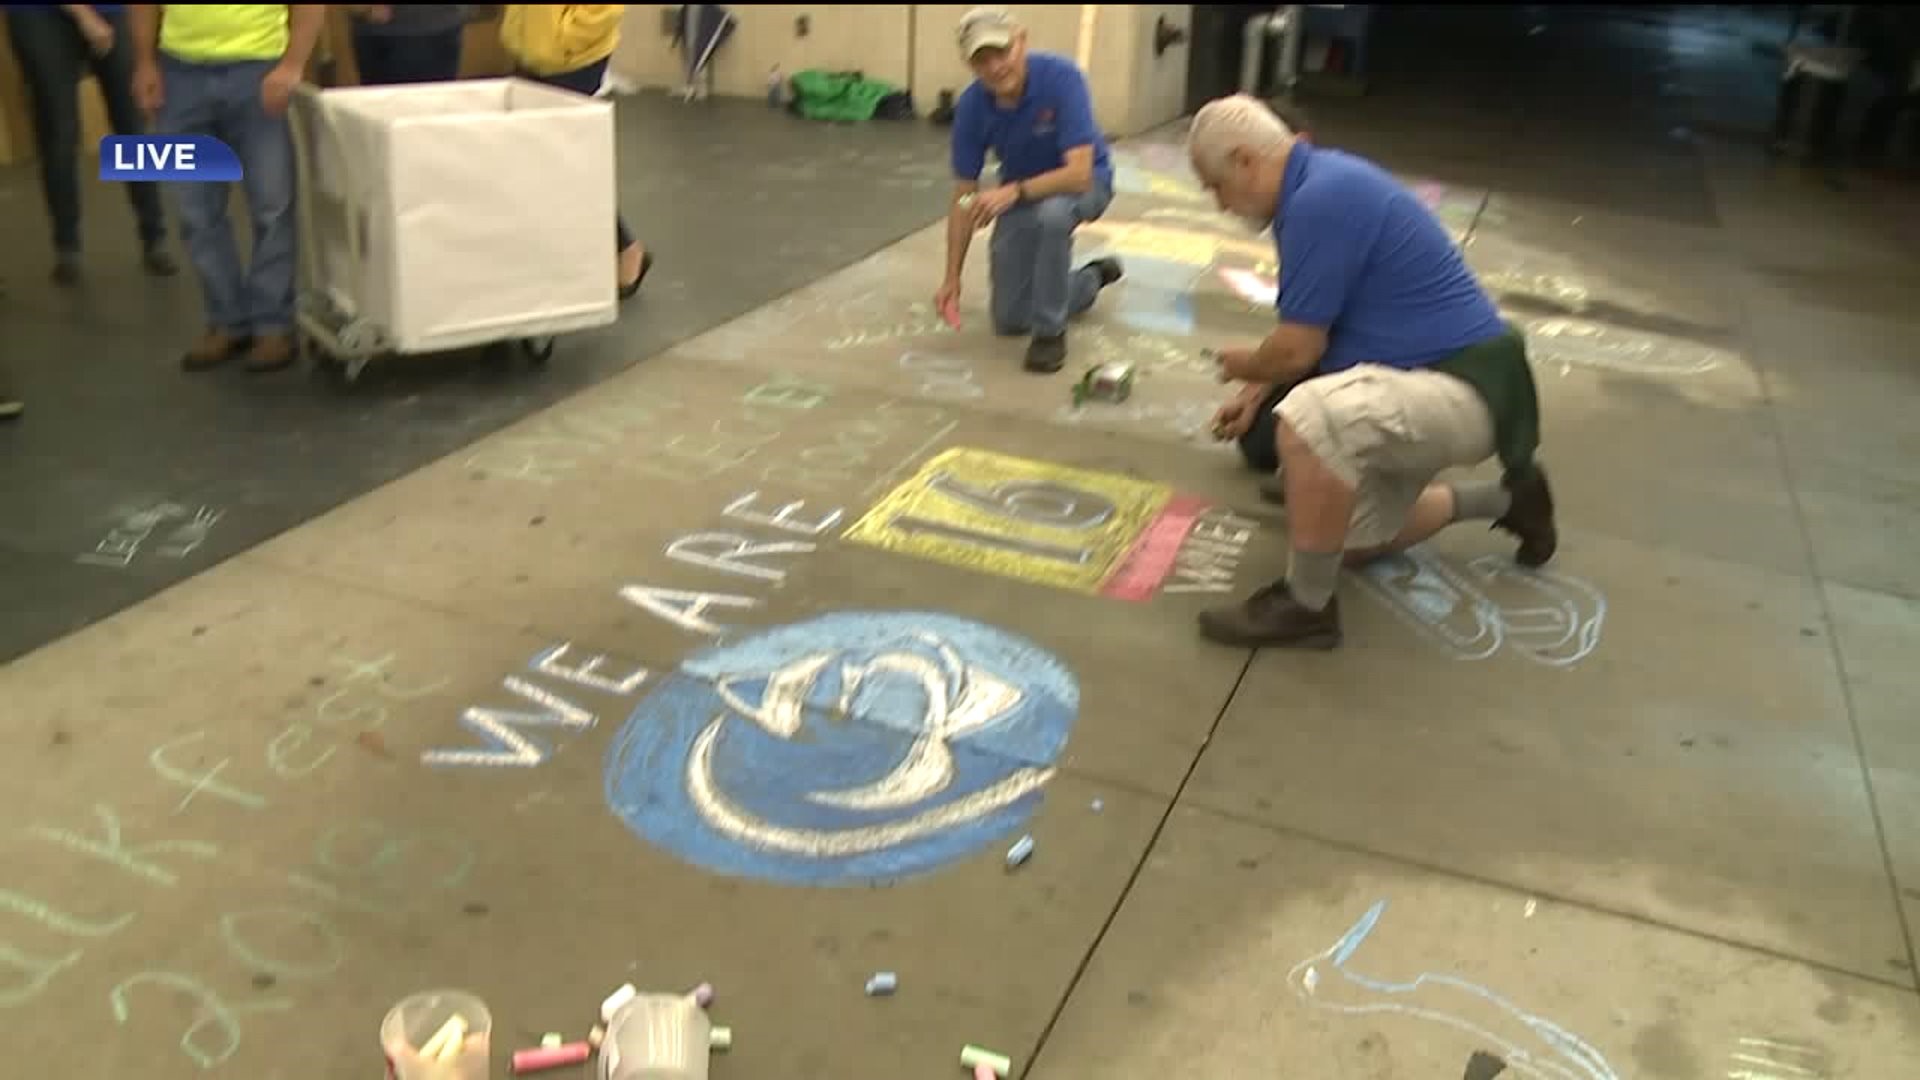 ChalkFest: Attempt to Break World Record This Weekend